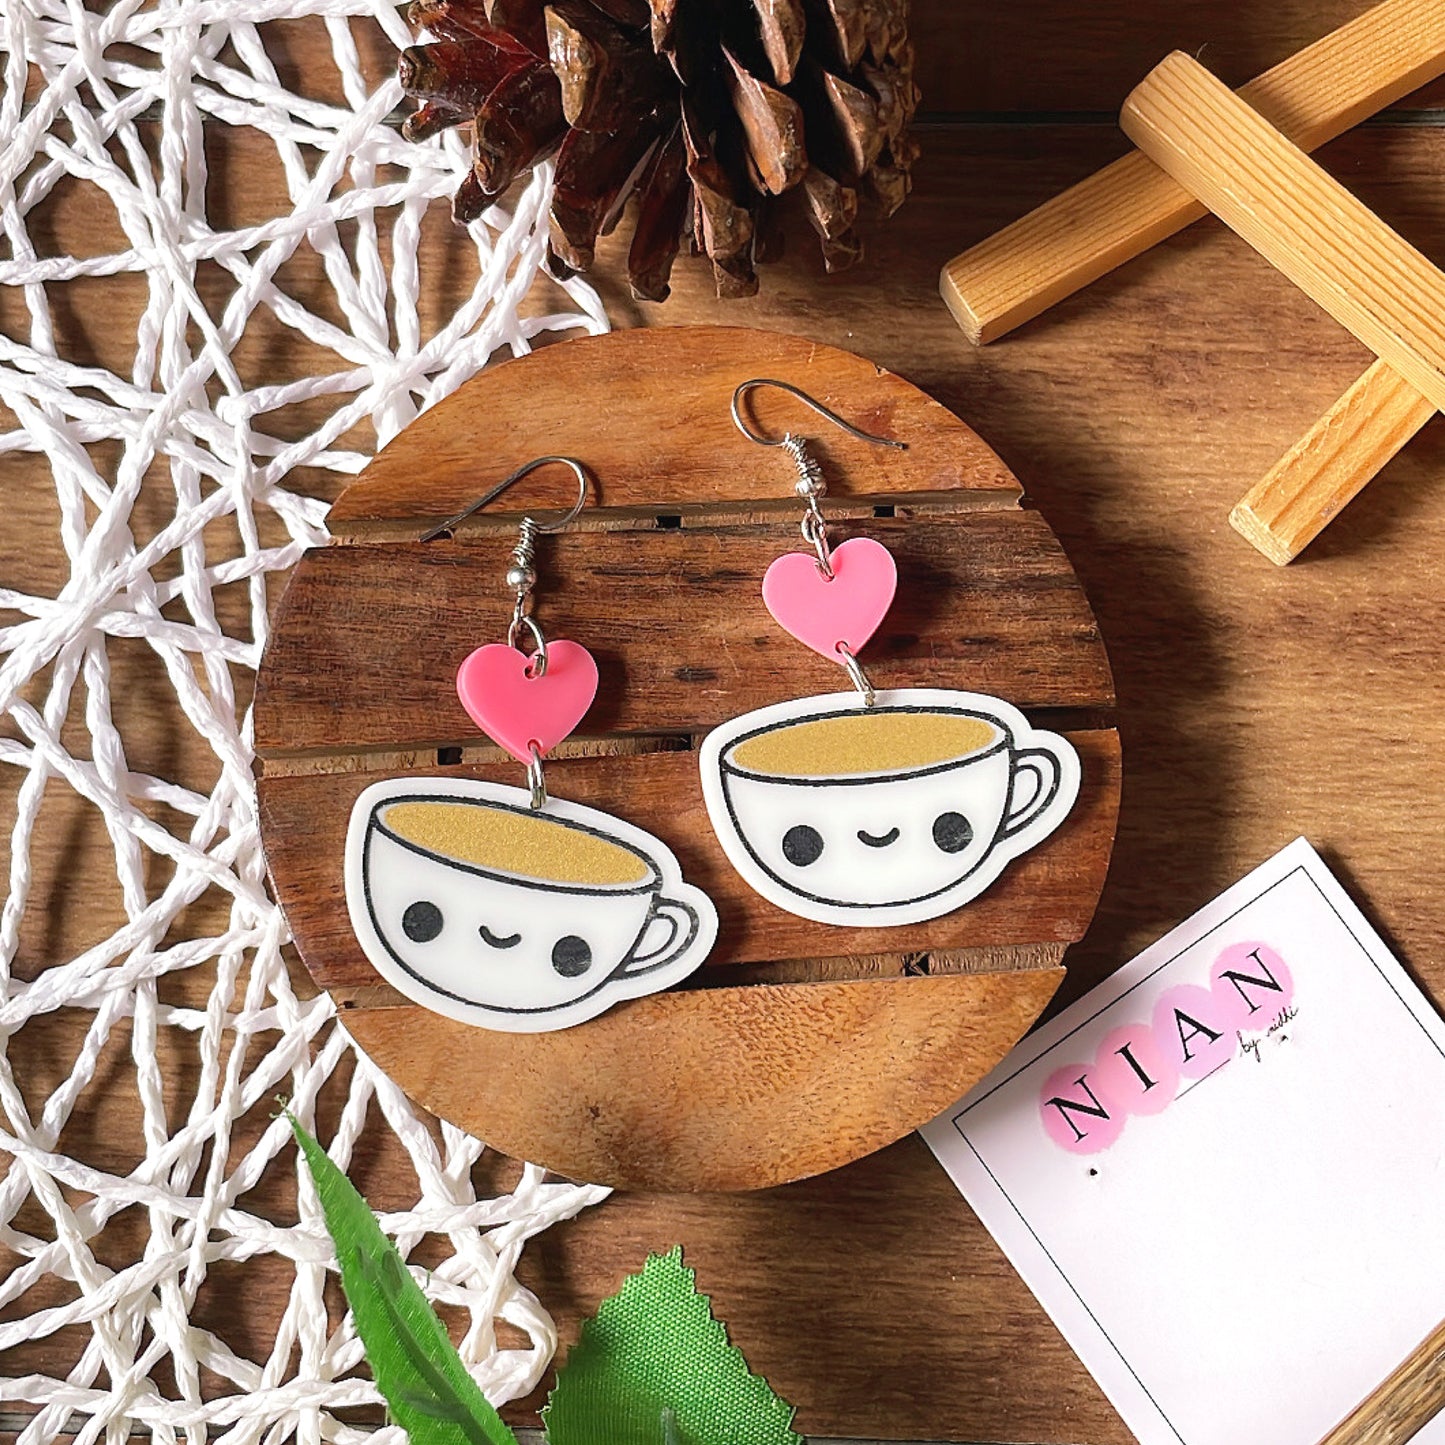 Candid Coffee Earrings - White, Pink & Brown - Nian by Nidhi - placed in a white background with cookies